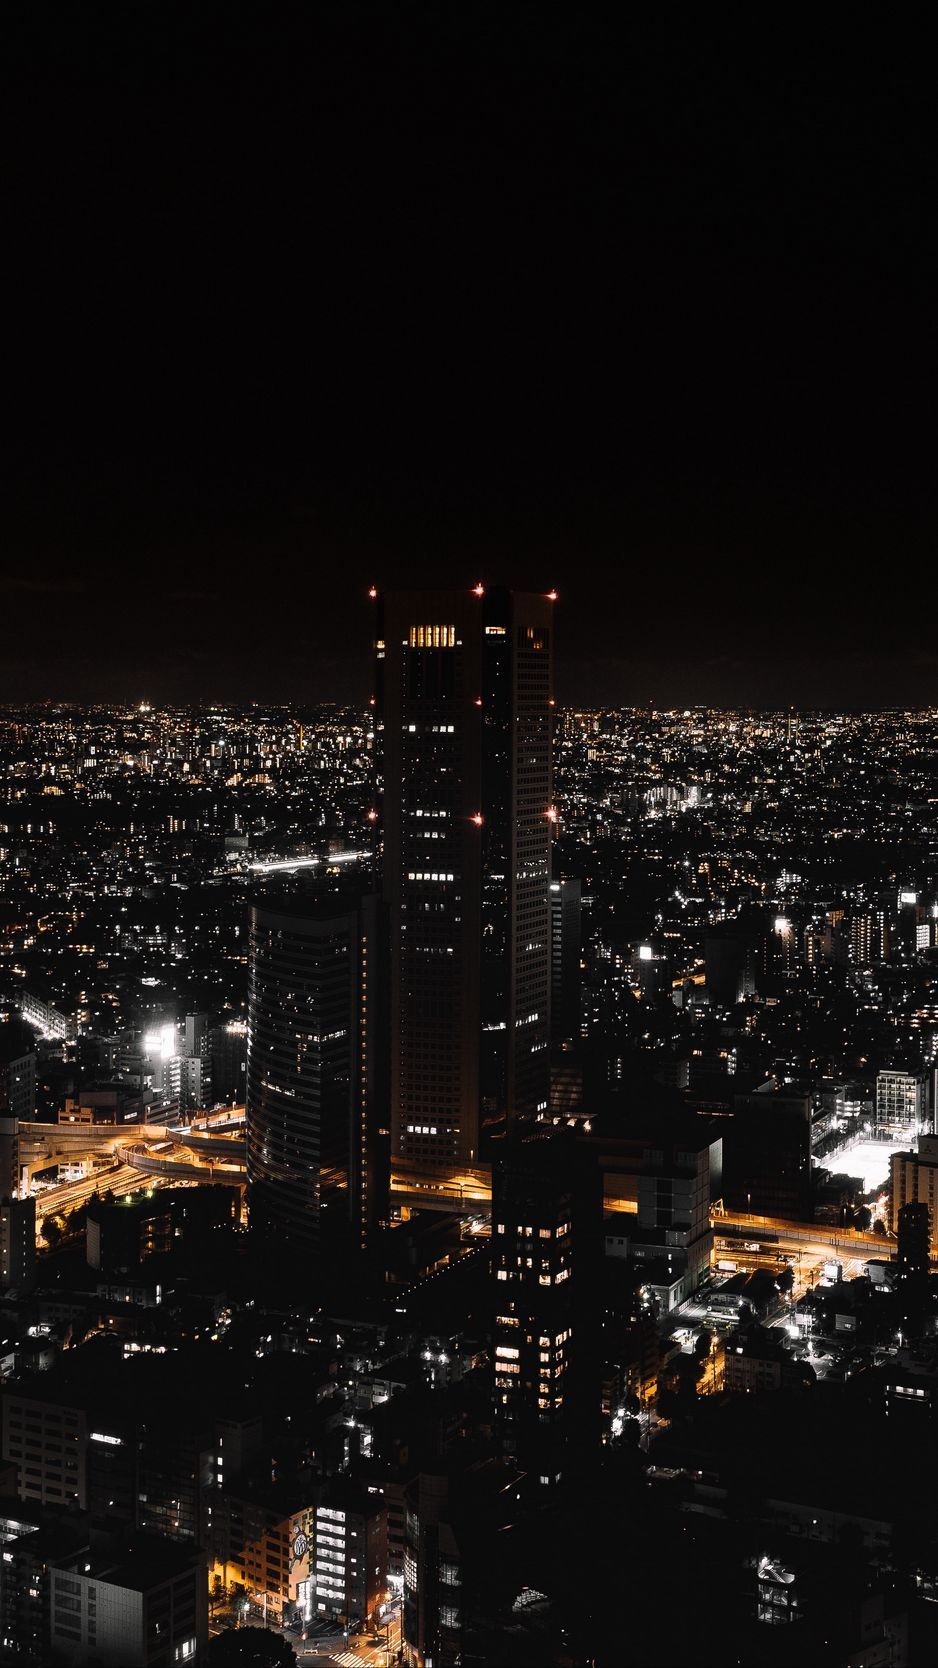 A city at night with many lights - Tokyo